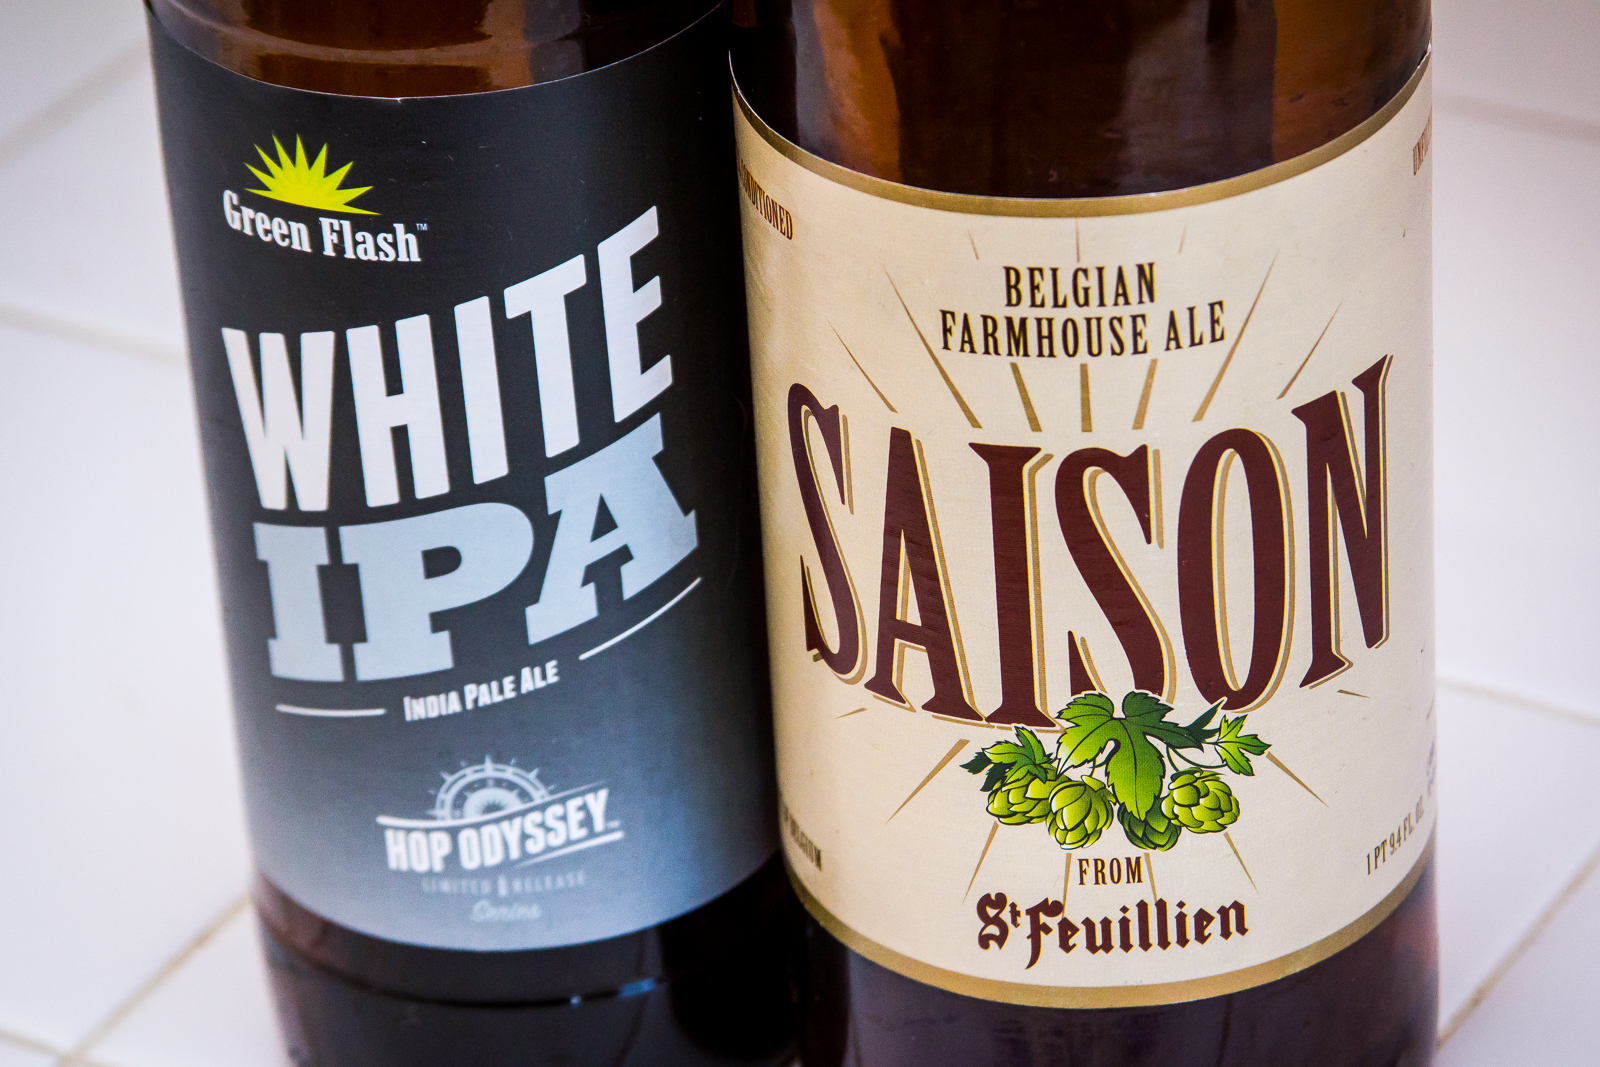 Going In Blind - Green Flash White IPA and St. Feuillien Saison